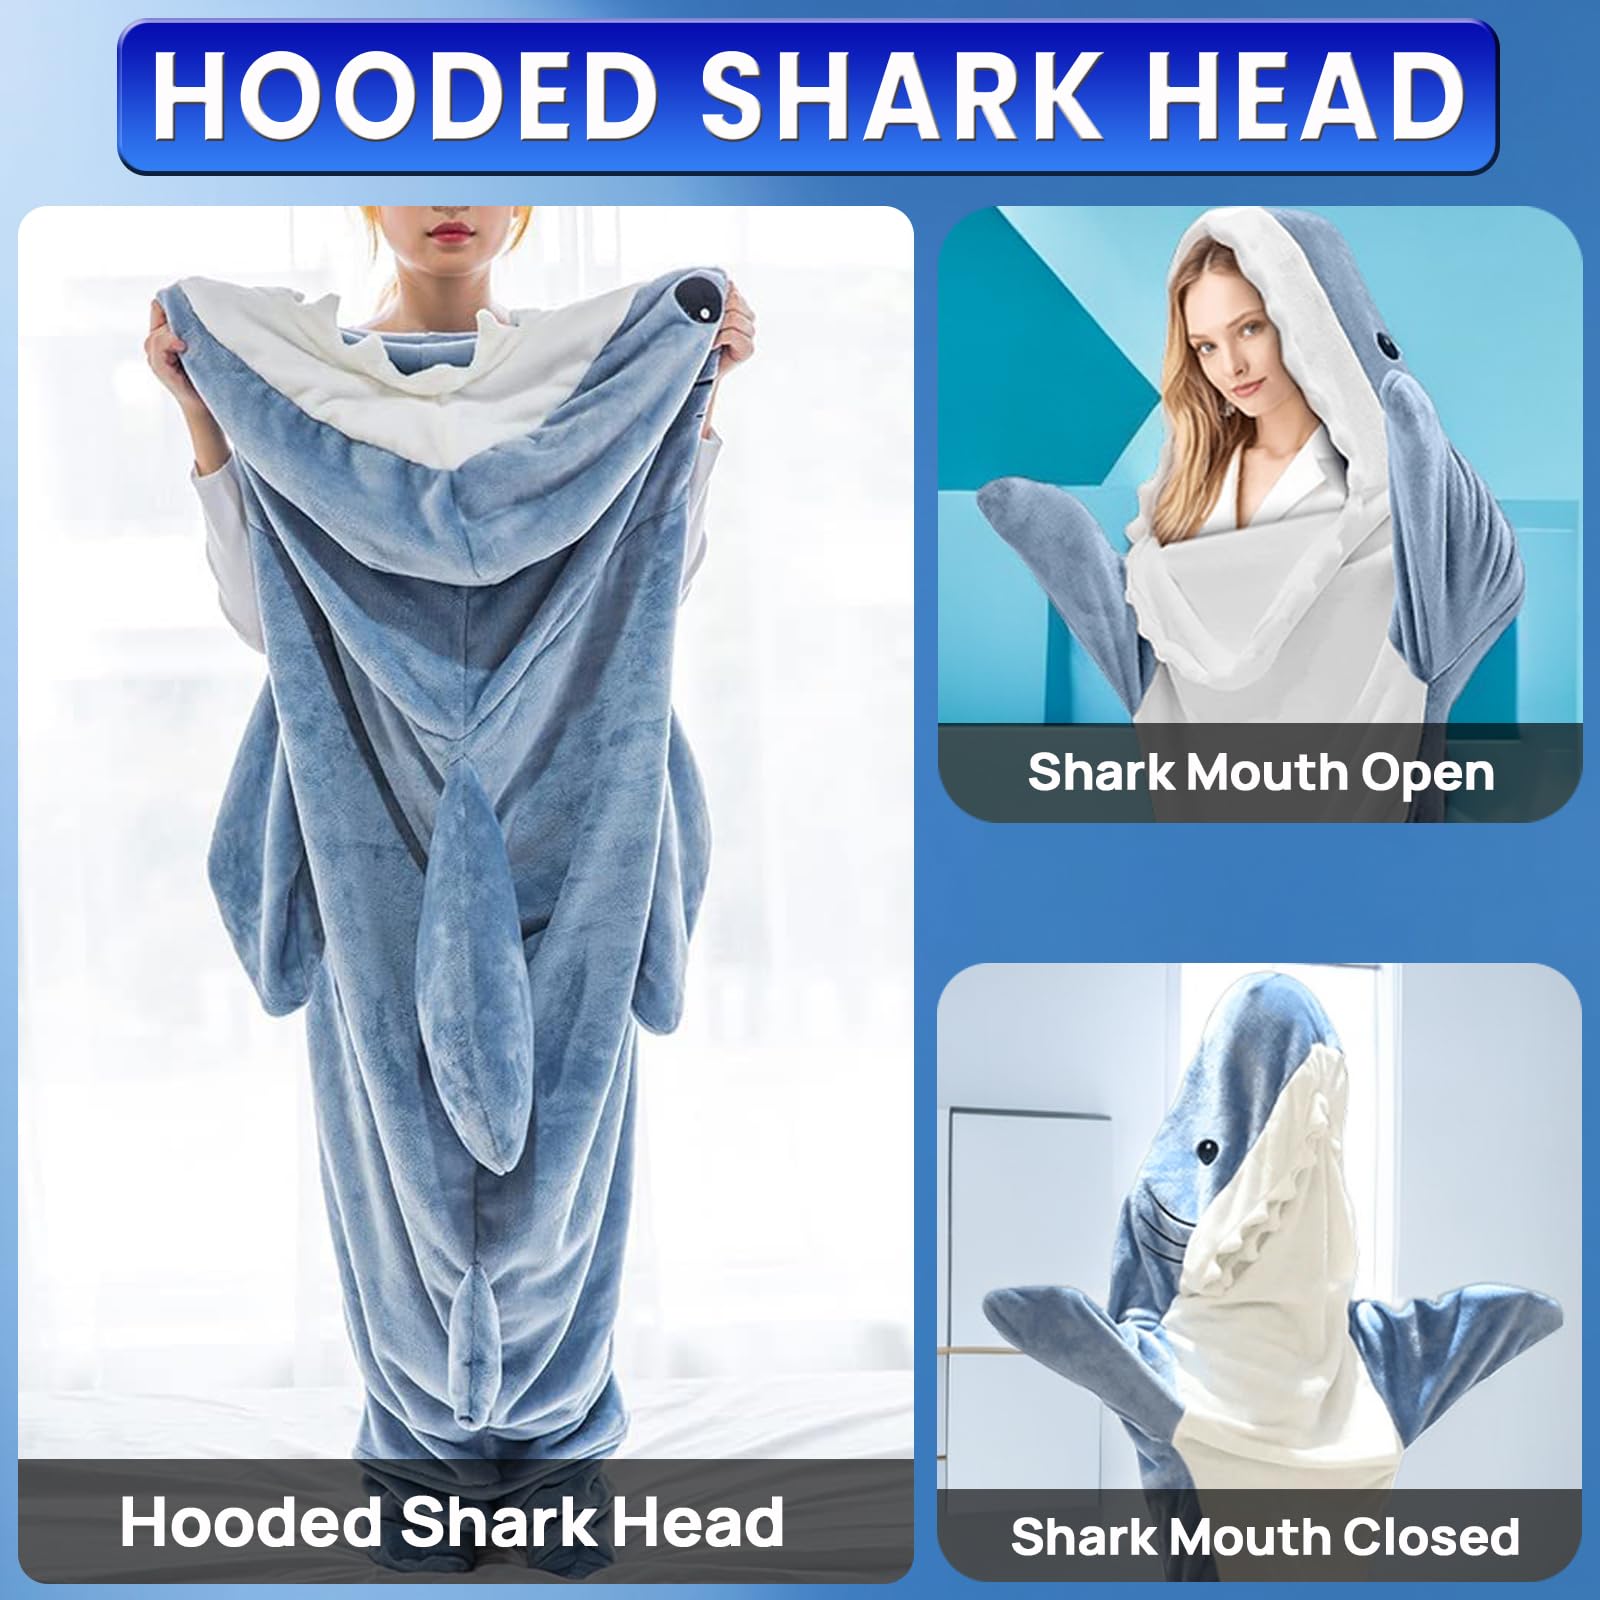 KoveYzao Shark Blanket Onesie for Adults, Wearable Shark Blanket Hoodie, Cozy Flannel Sleeping Bag, Cute and Funny One-piece Pajamas, One Size Fits All, Creative Gifts for Her/Him